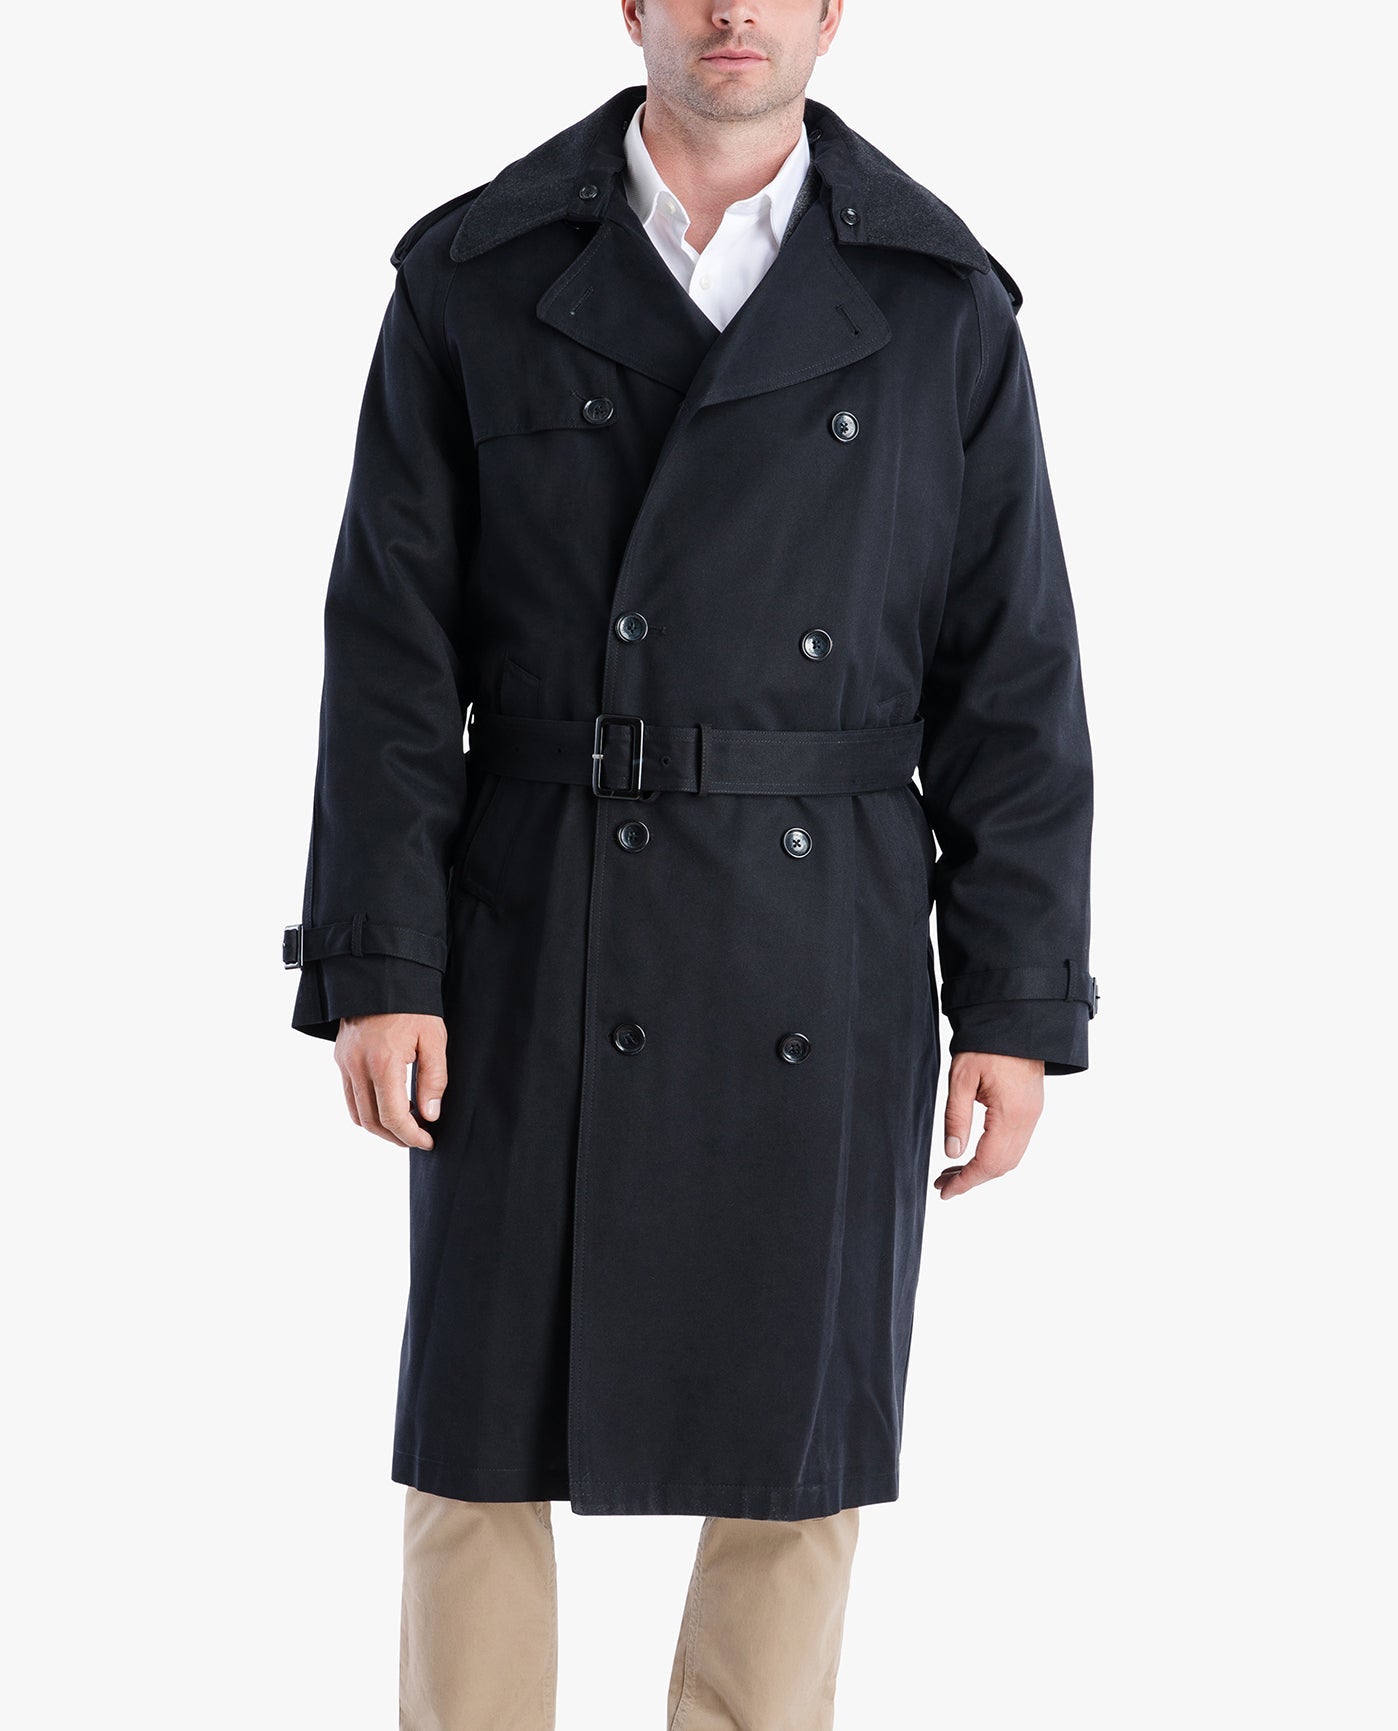 FRONT VIEW OF CLASSIC DOUBLE BREASTED TRENCH COAT | BLACK